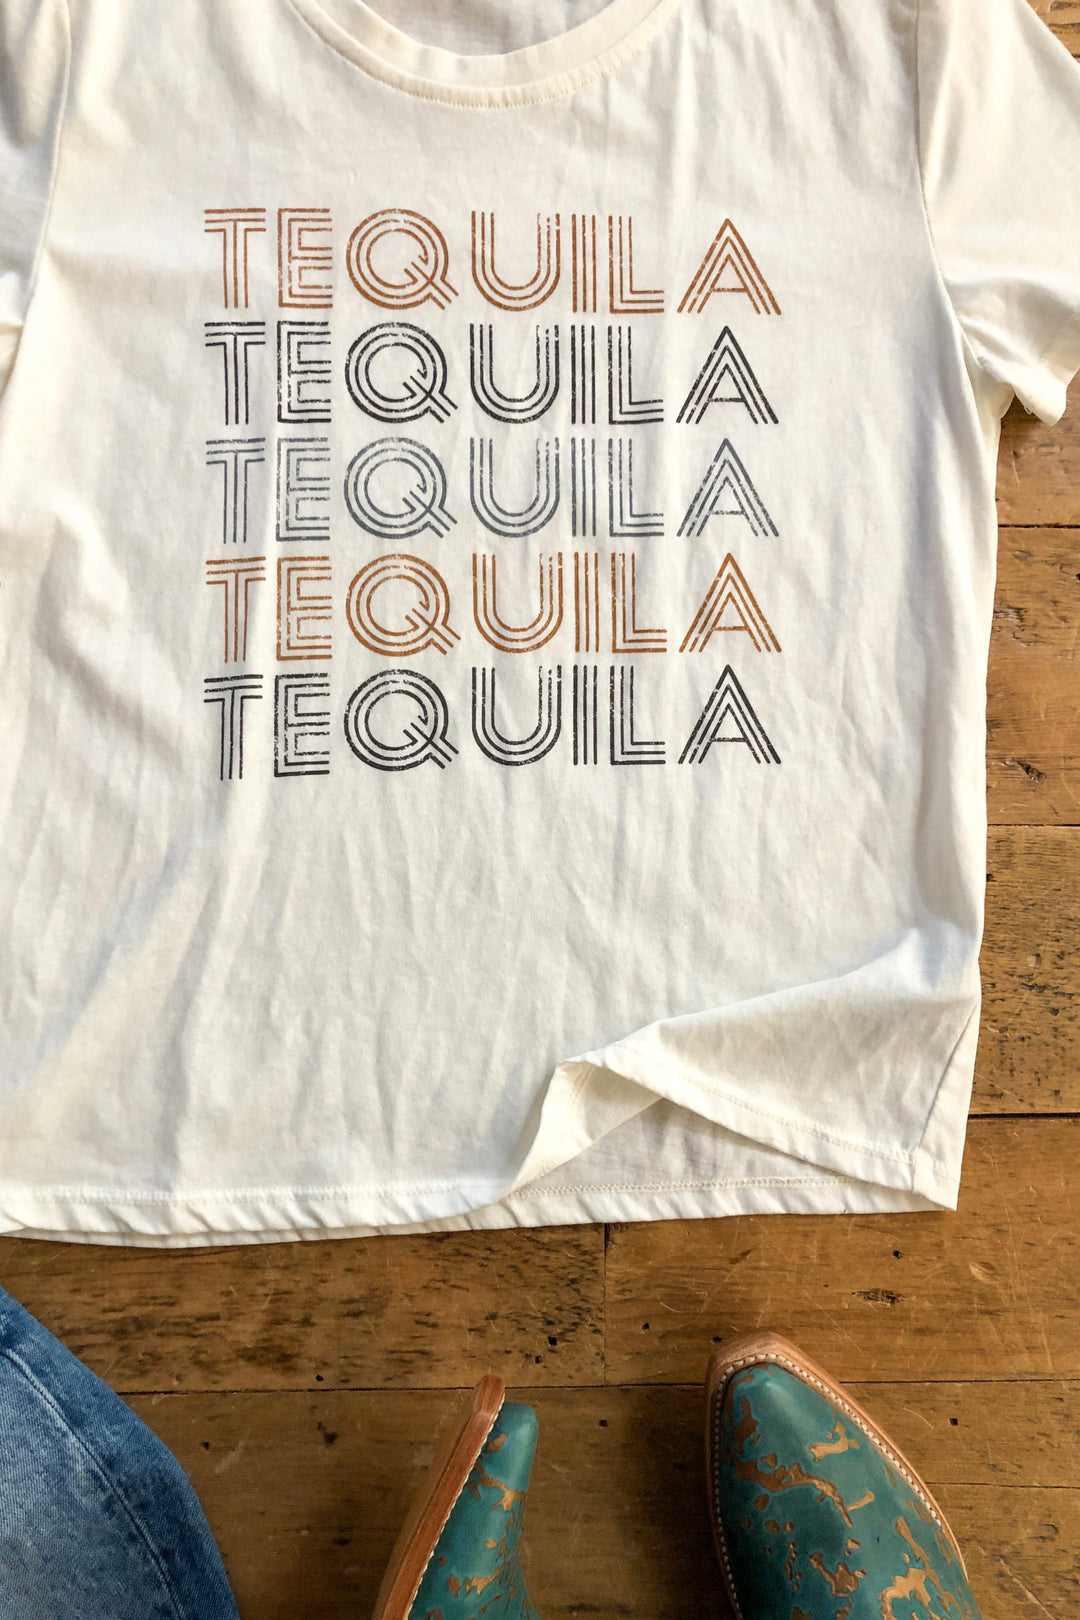 The Tequila